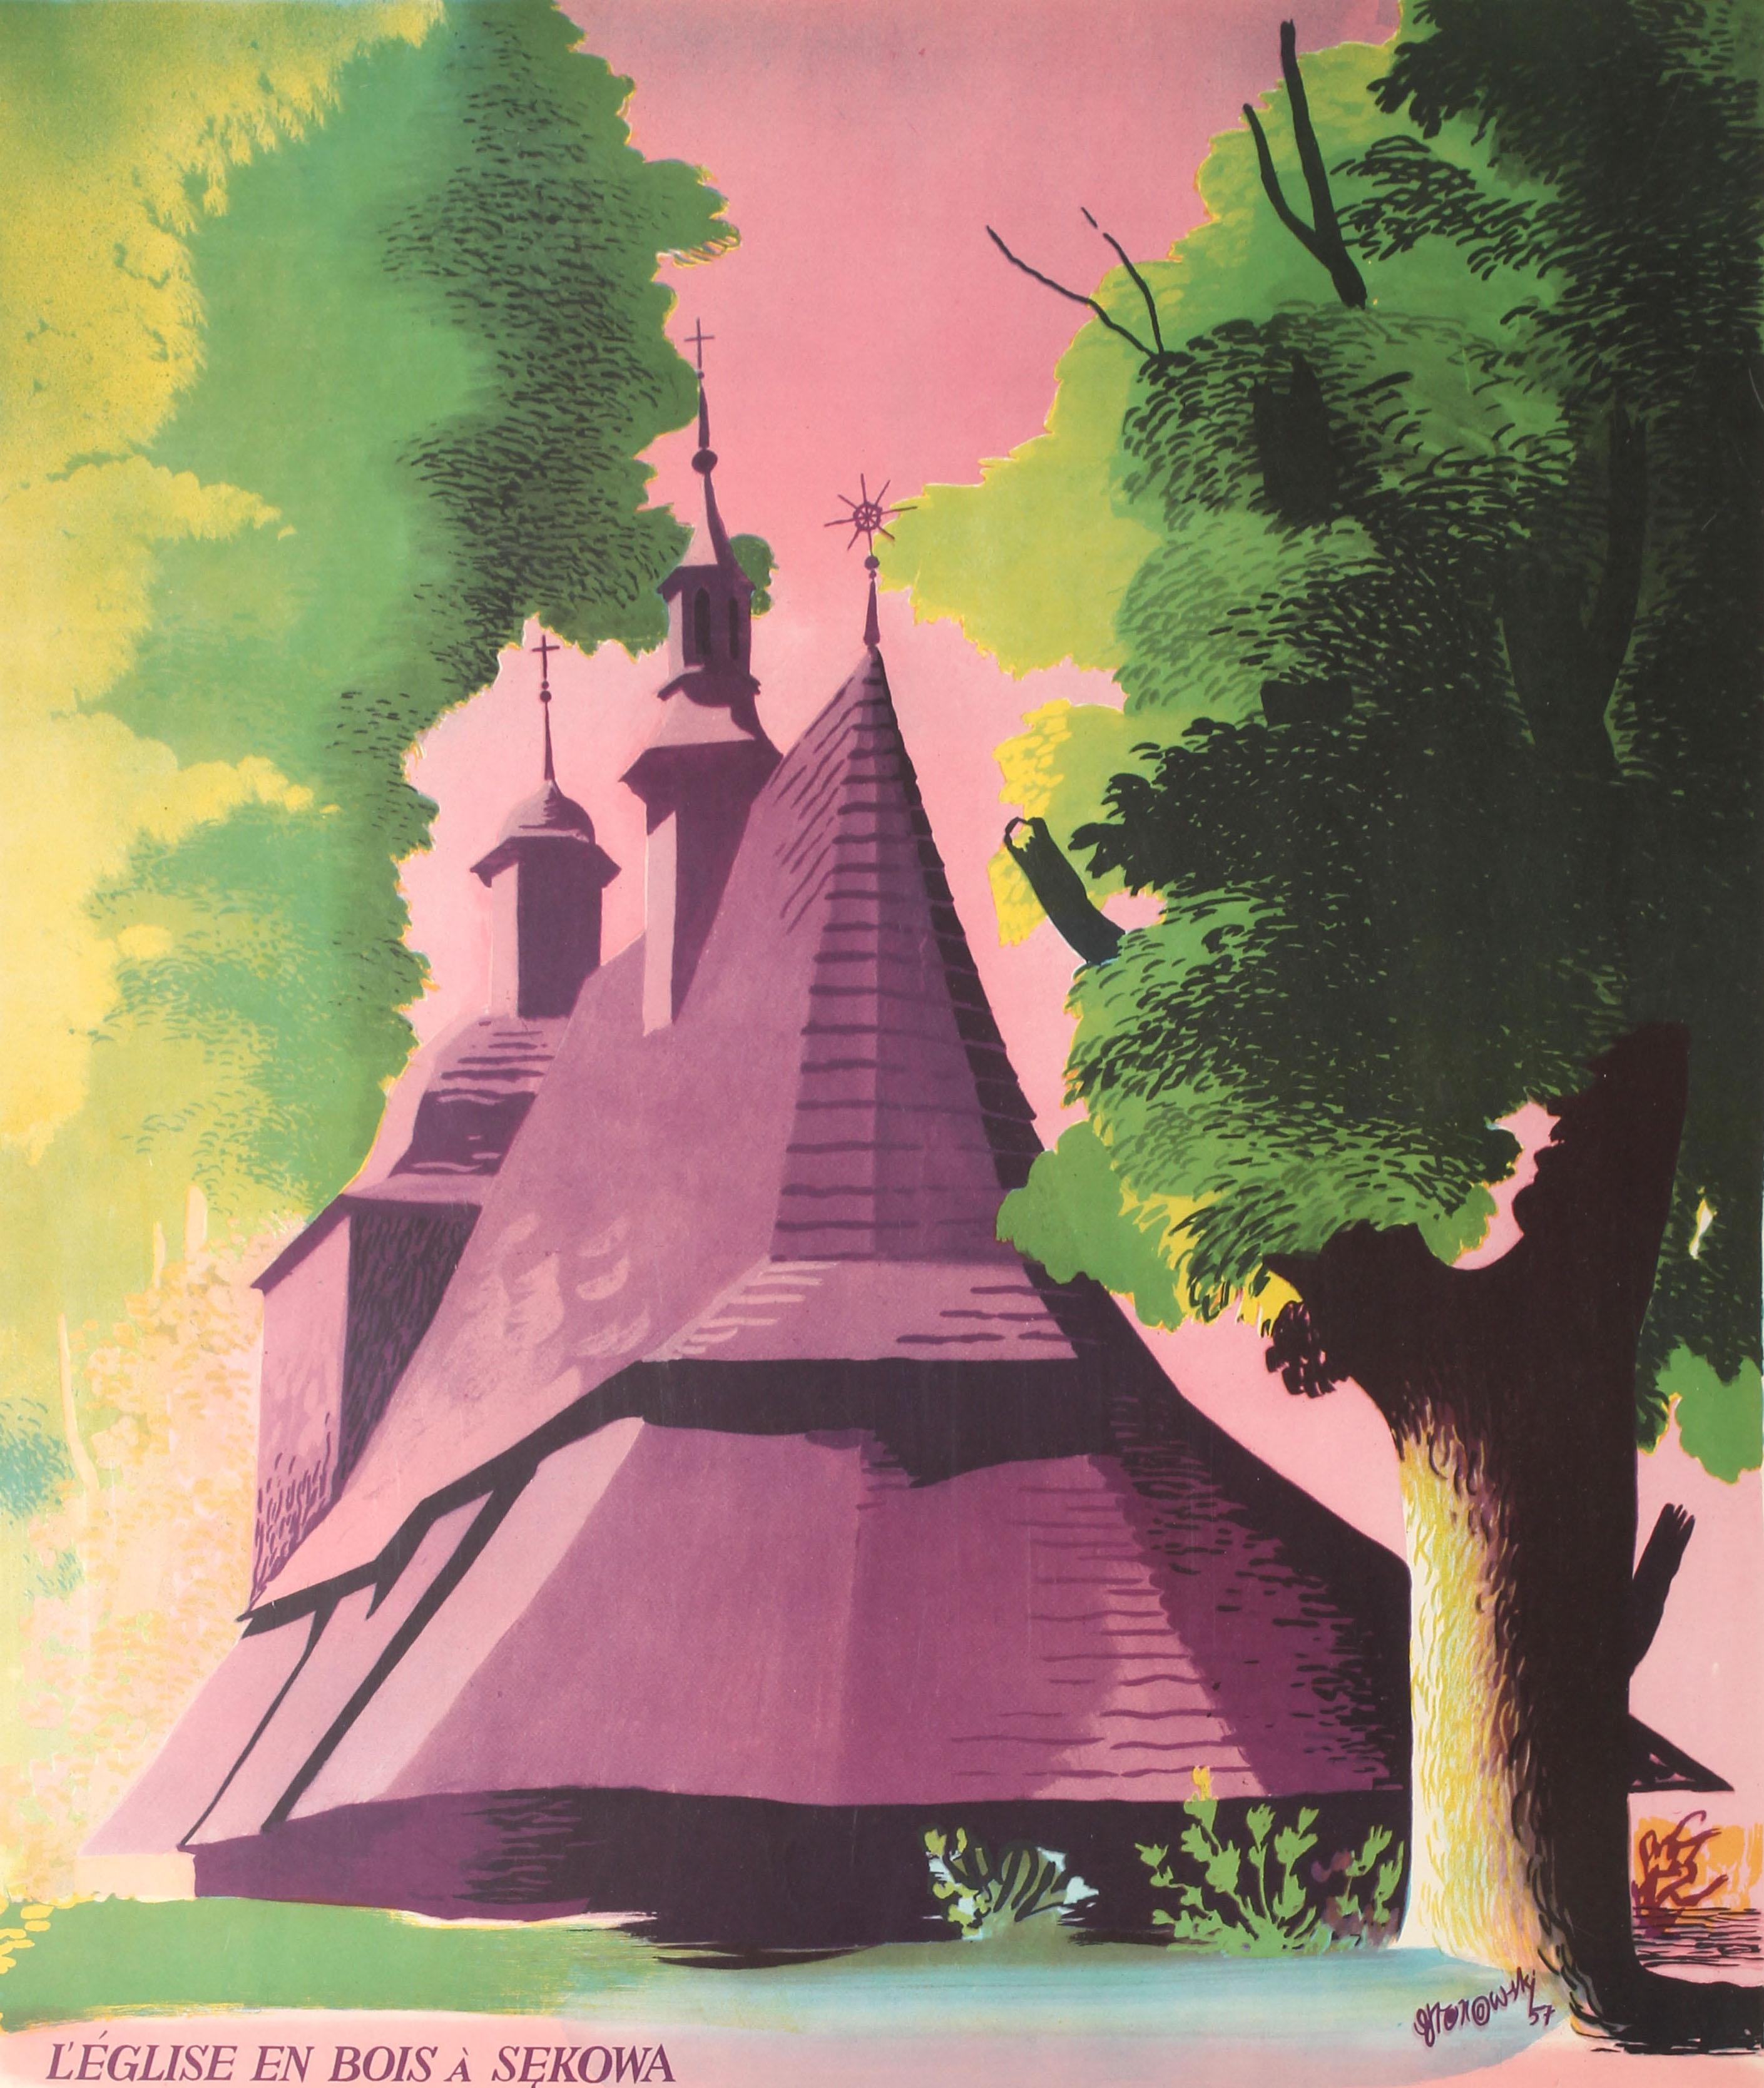 Original vintage travel poster - Visit Poland / Visitez la Pologne l'Eglise en Boise a Sekowa 1540 - featuring an illustration in pink and purple of the historic Gothic wooden church of St Philip and St James with its unique architecture of a steep